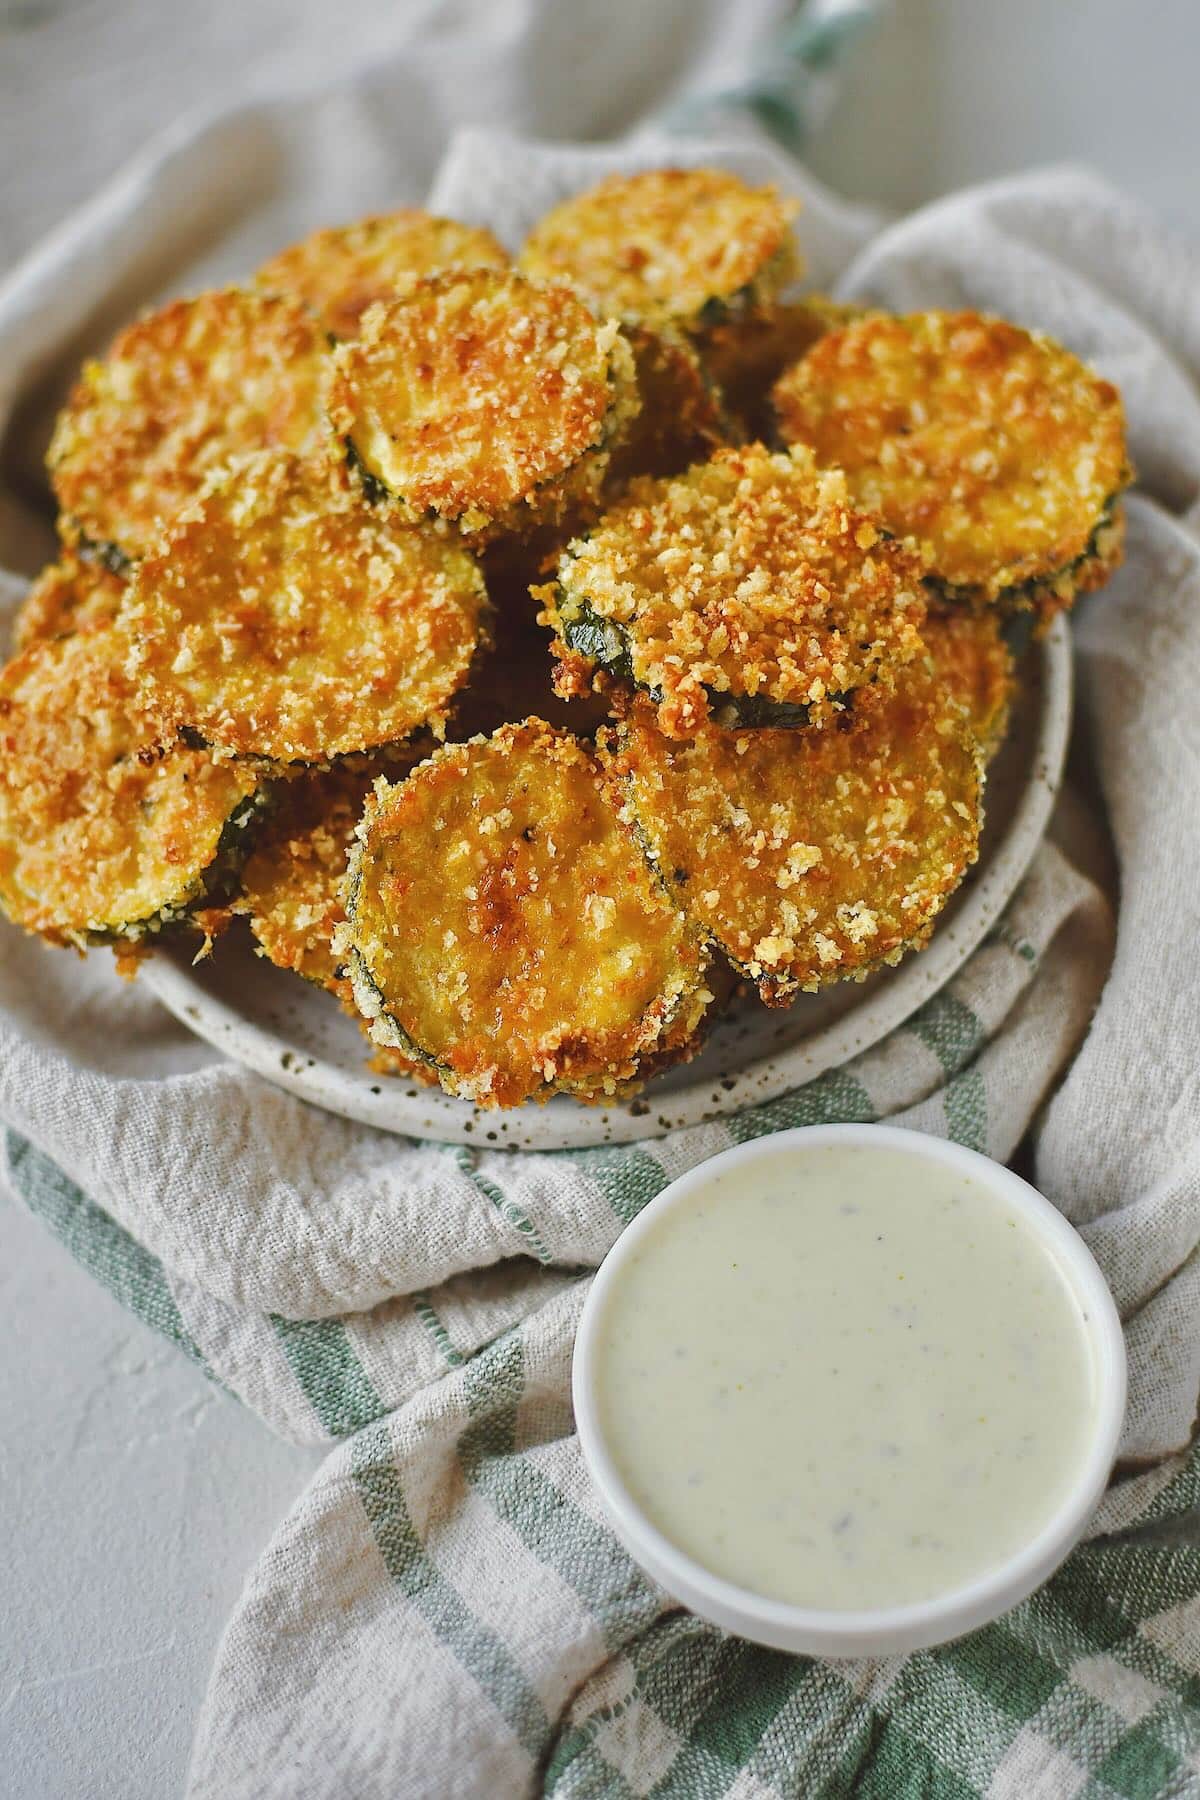 Zucchini Chips after baking, stacked on a plate and ready to eat with a side of ranch.